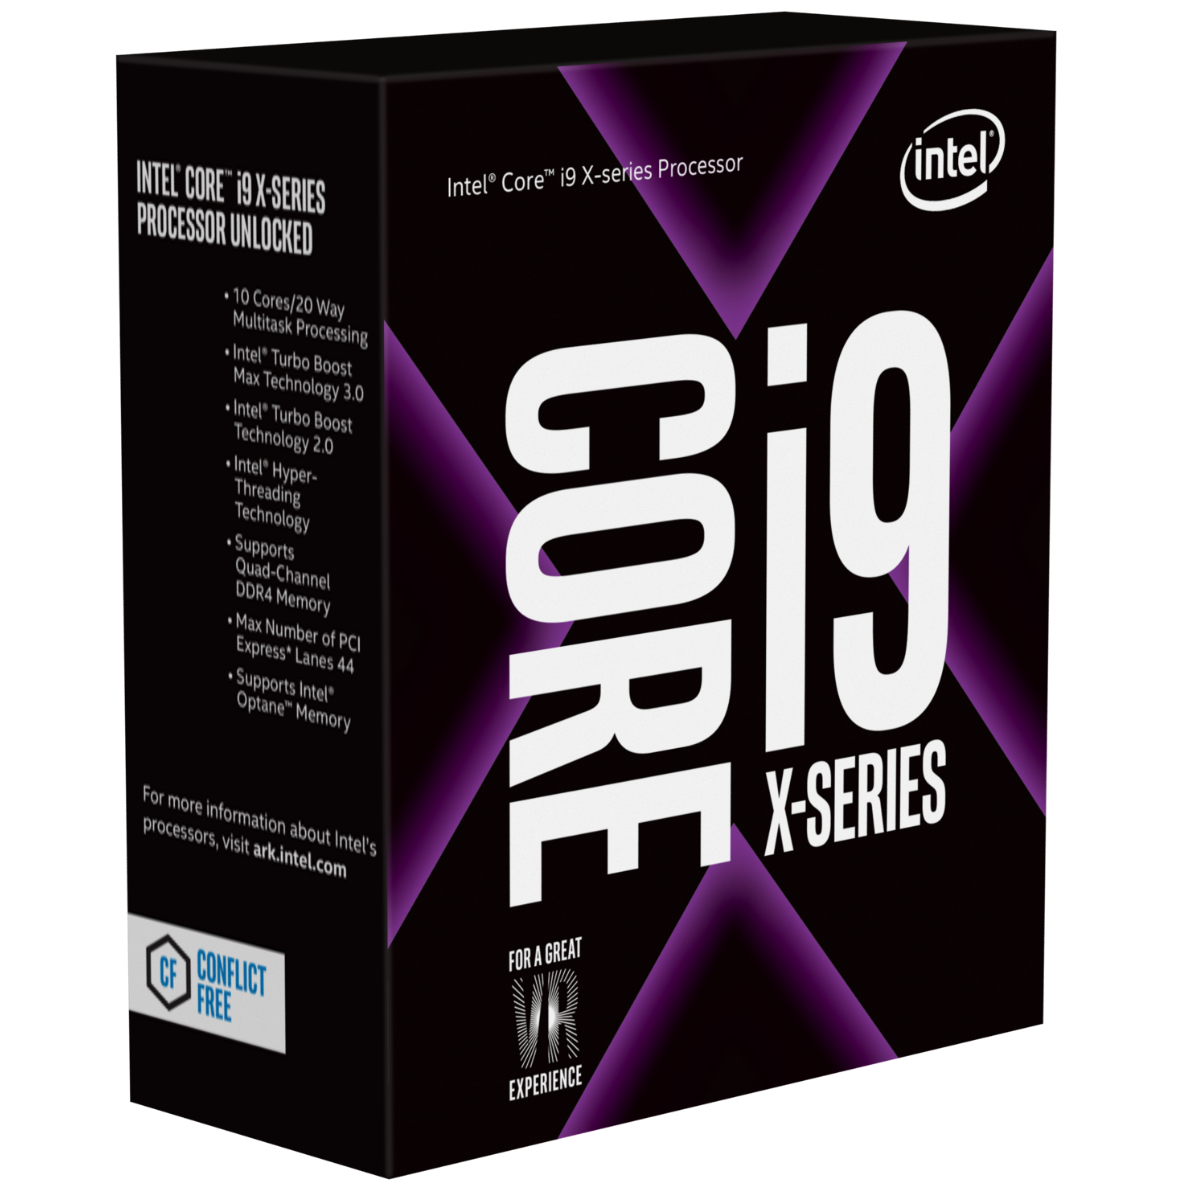 CPU Intel Core i9 - 7960X 2.8 GHz Turbo 4.2 Up to 4.4 GHz / 22 MB / 16 Cores, 32 Threads / socket 2066